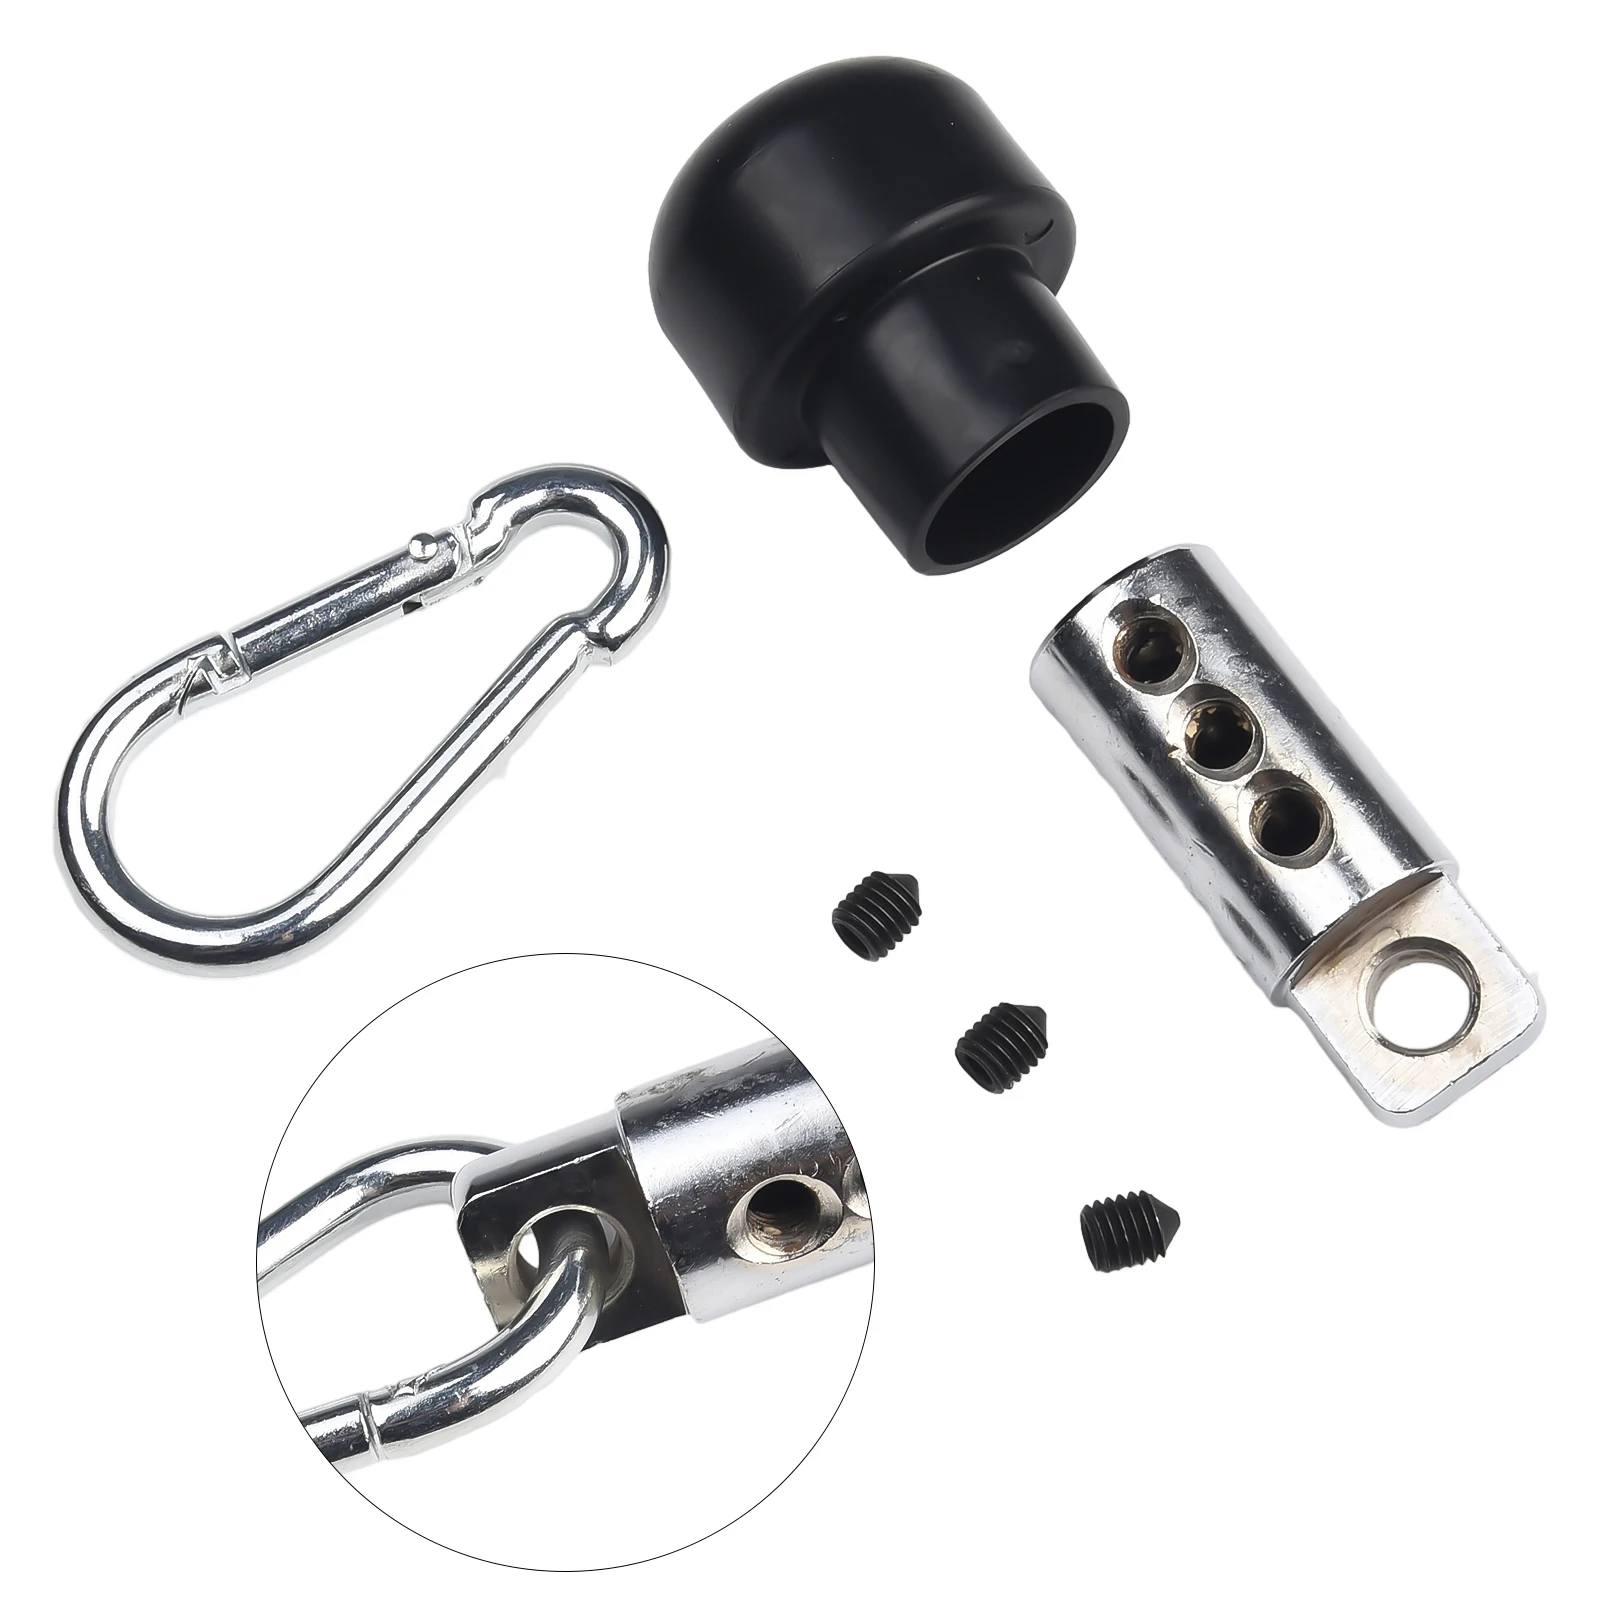 

High Quality Brand New Cable Stopper Rope Joint Terminal Black Fitness Equipment Universal Wire Connector 1 Set 270g 4.5cm